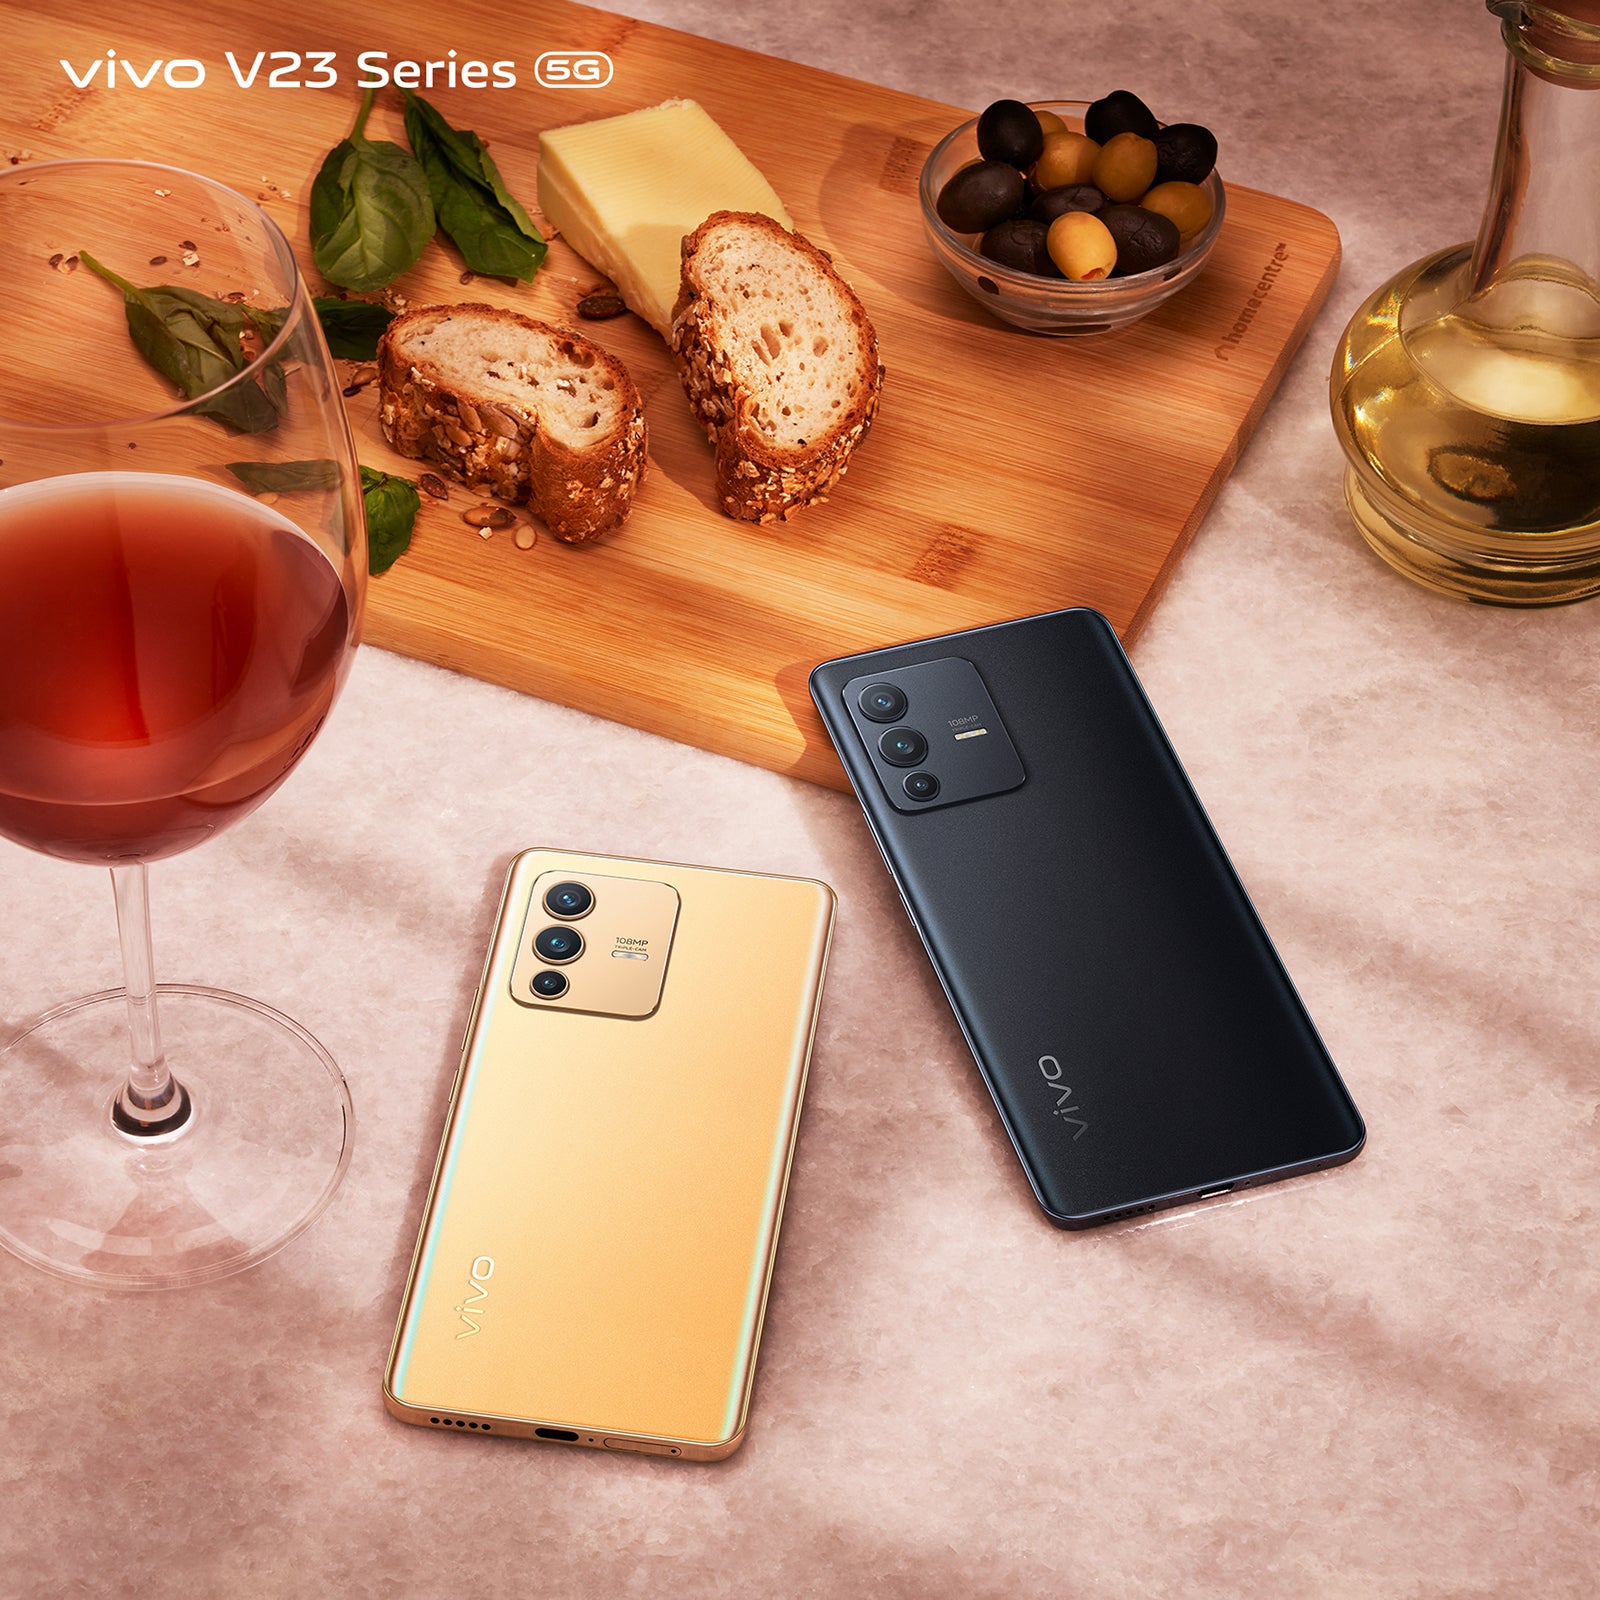 Vivo V23 5G review: Unique design and great selfie experience